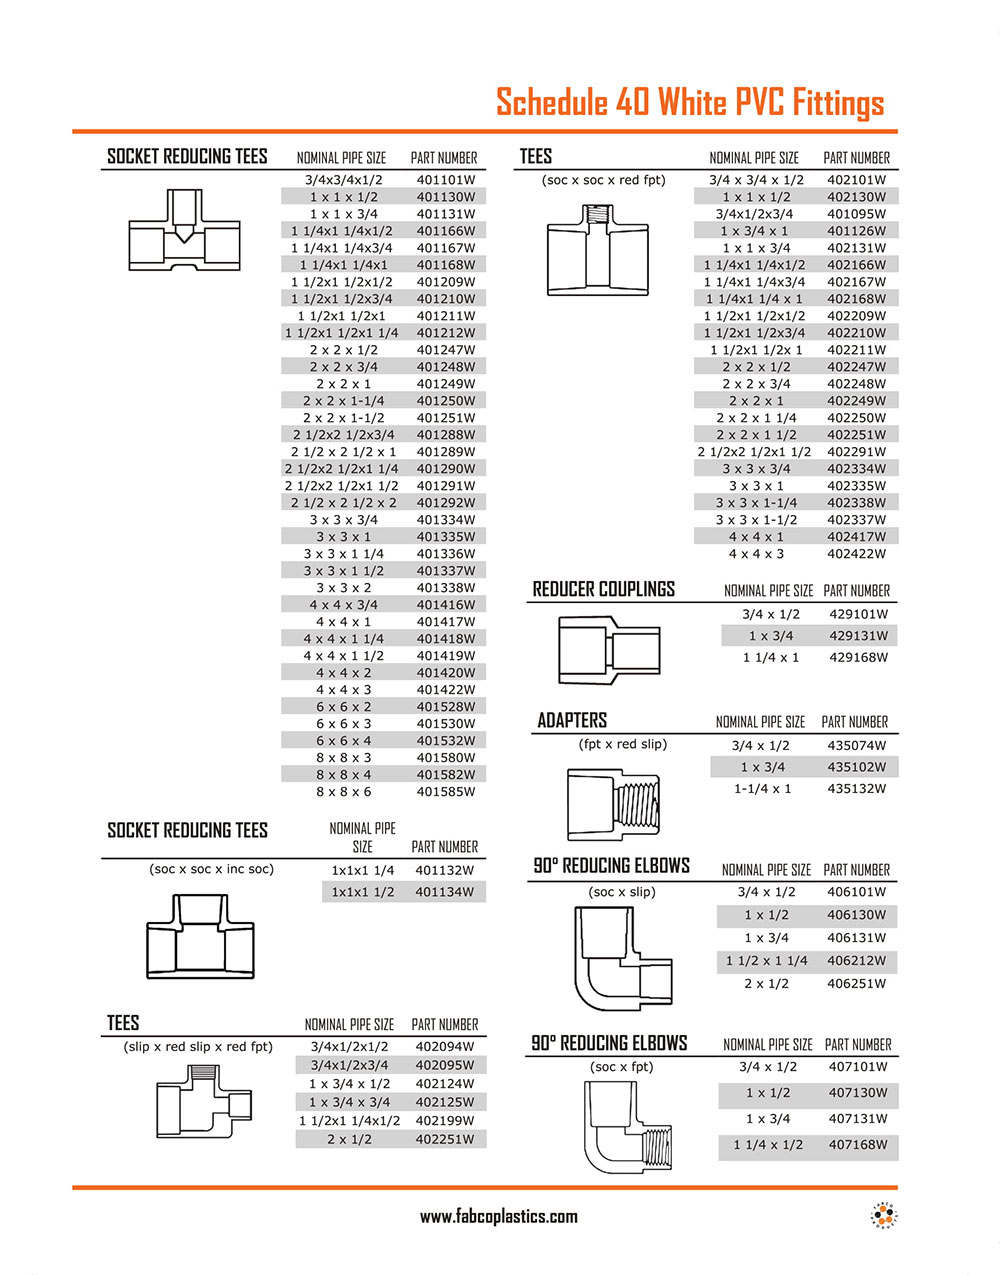 Schedule 40 Pvc Fittings Chart | Hot Sex Picture